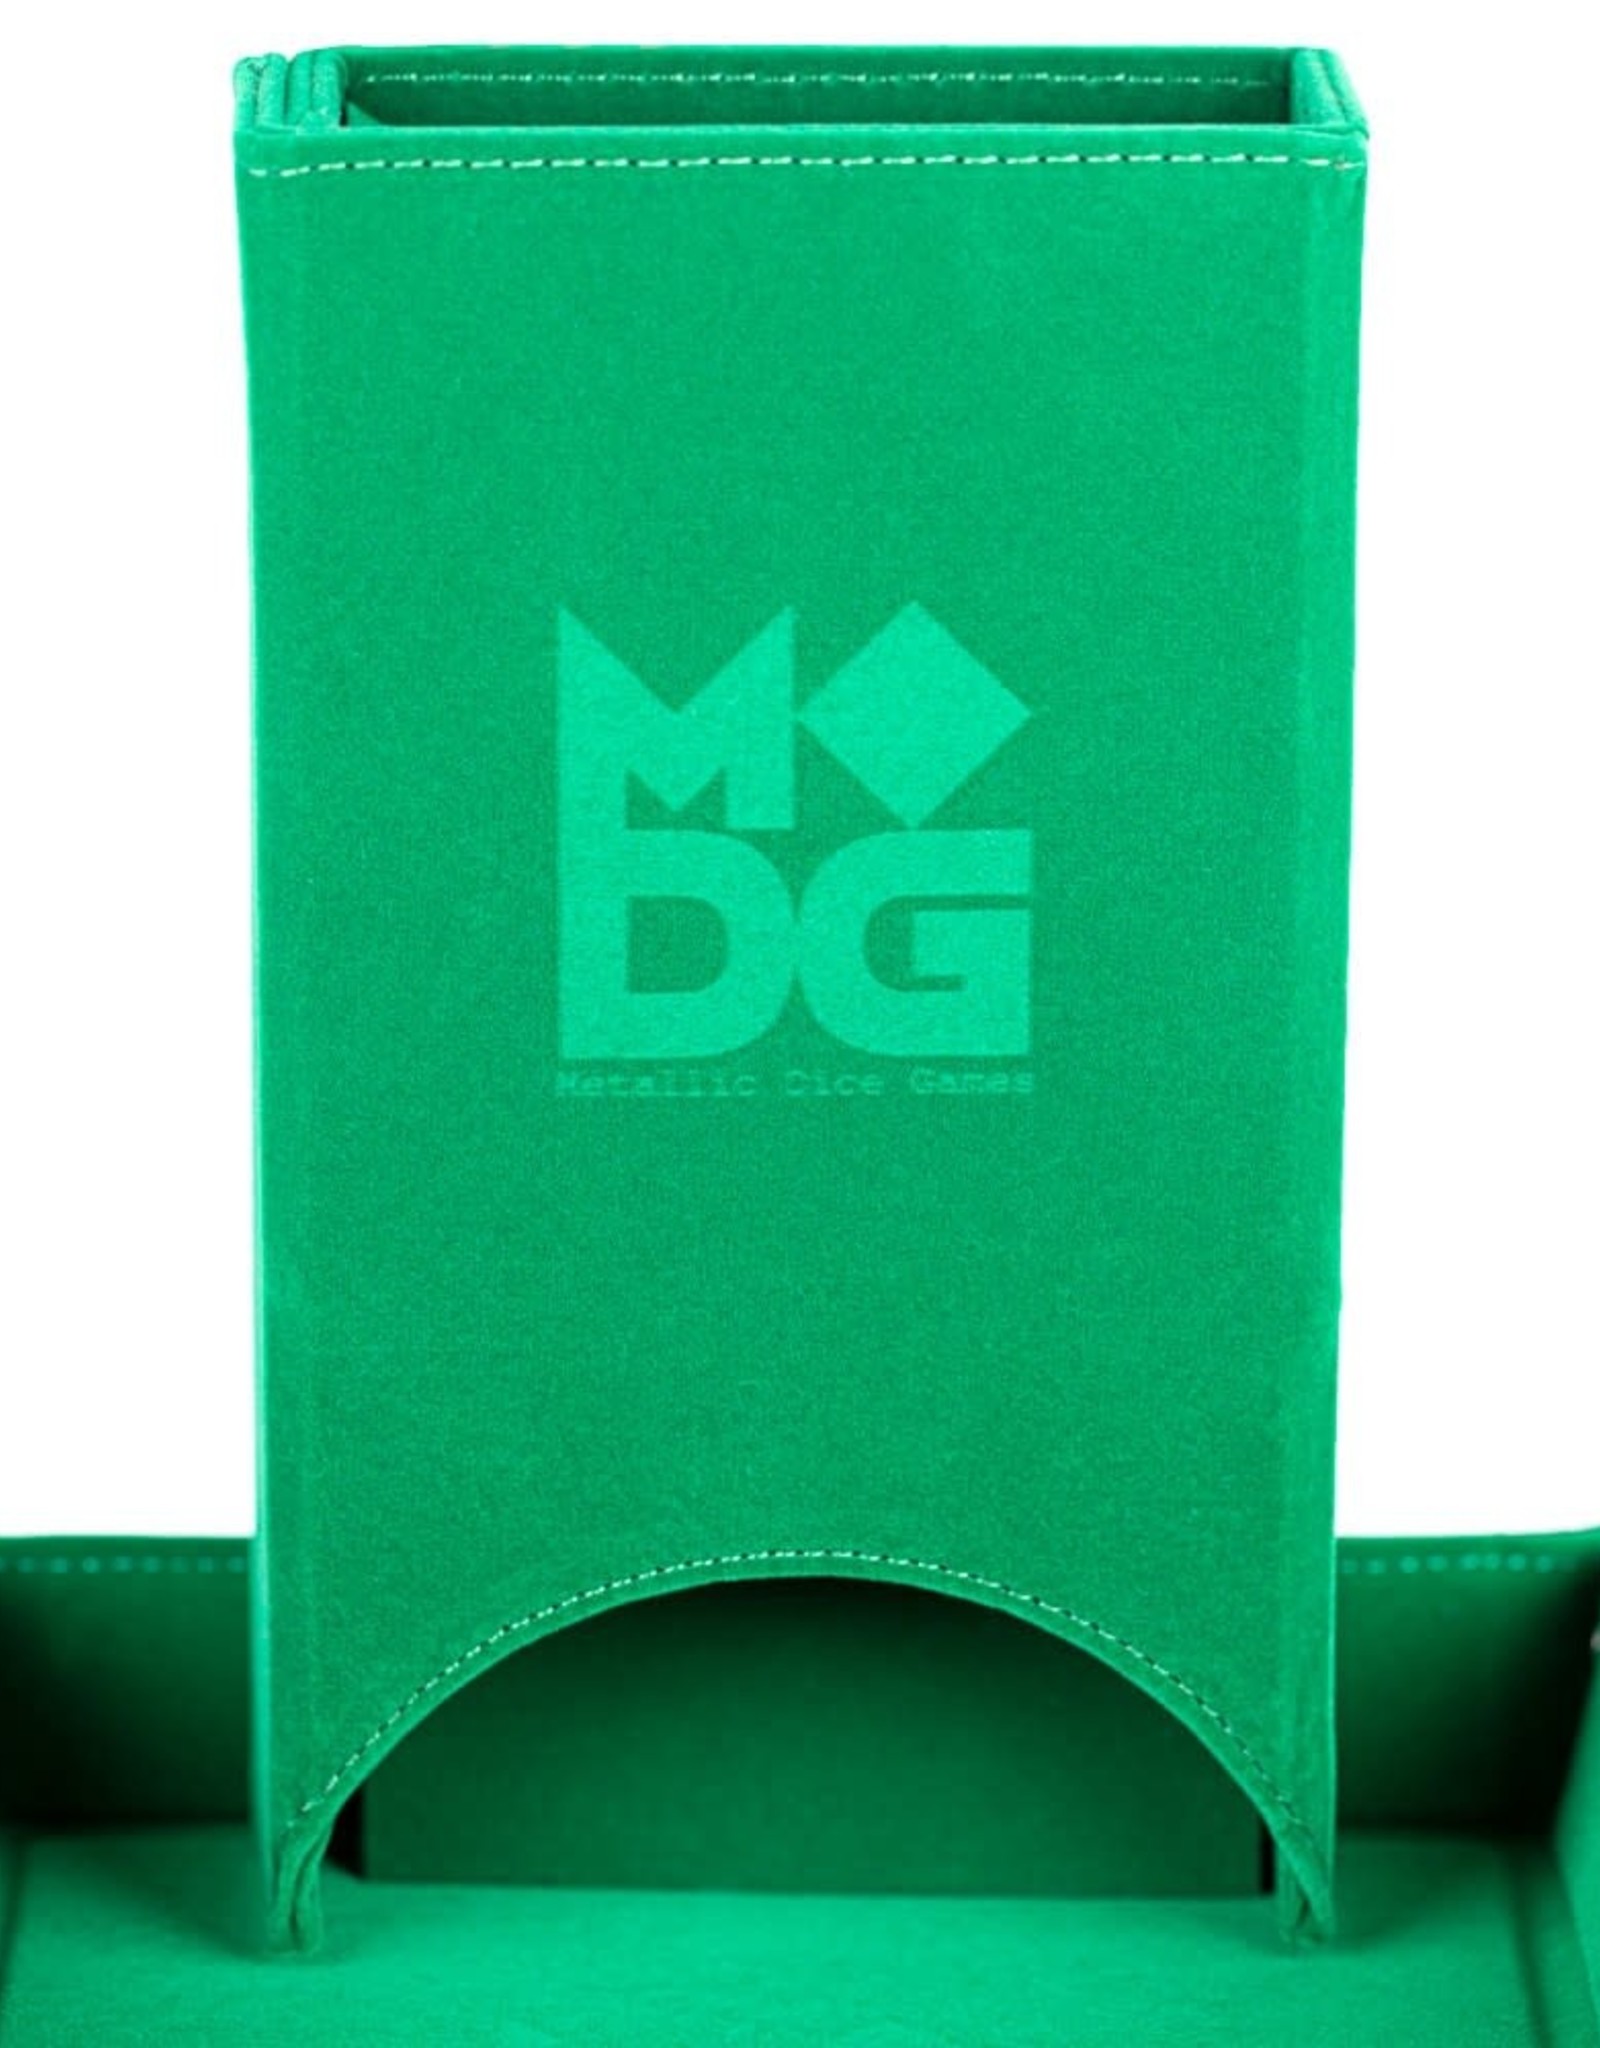 MDG Dice Tower: Green